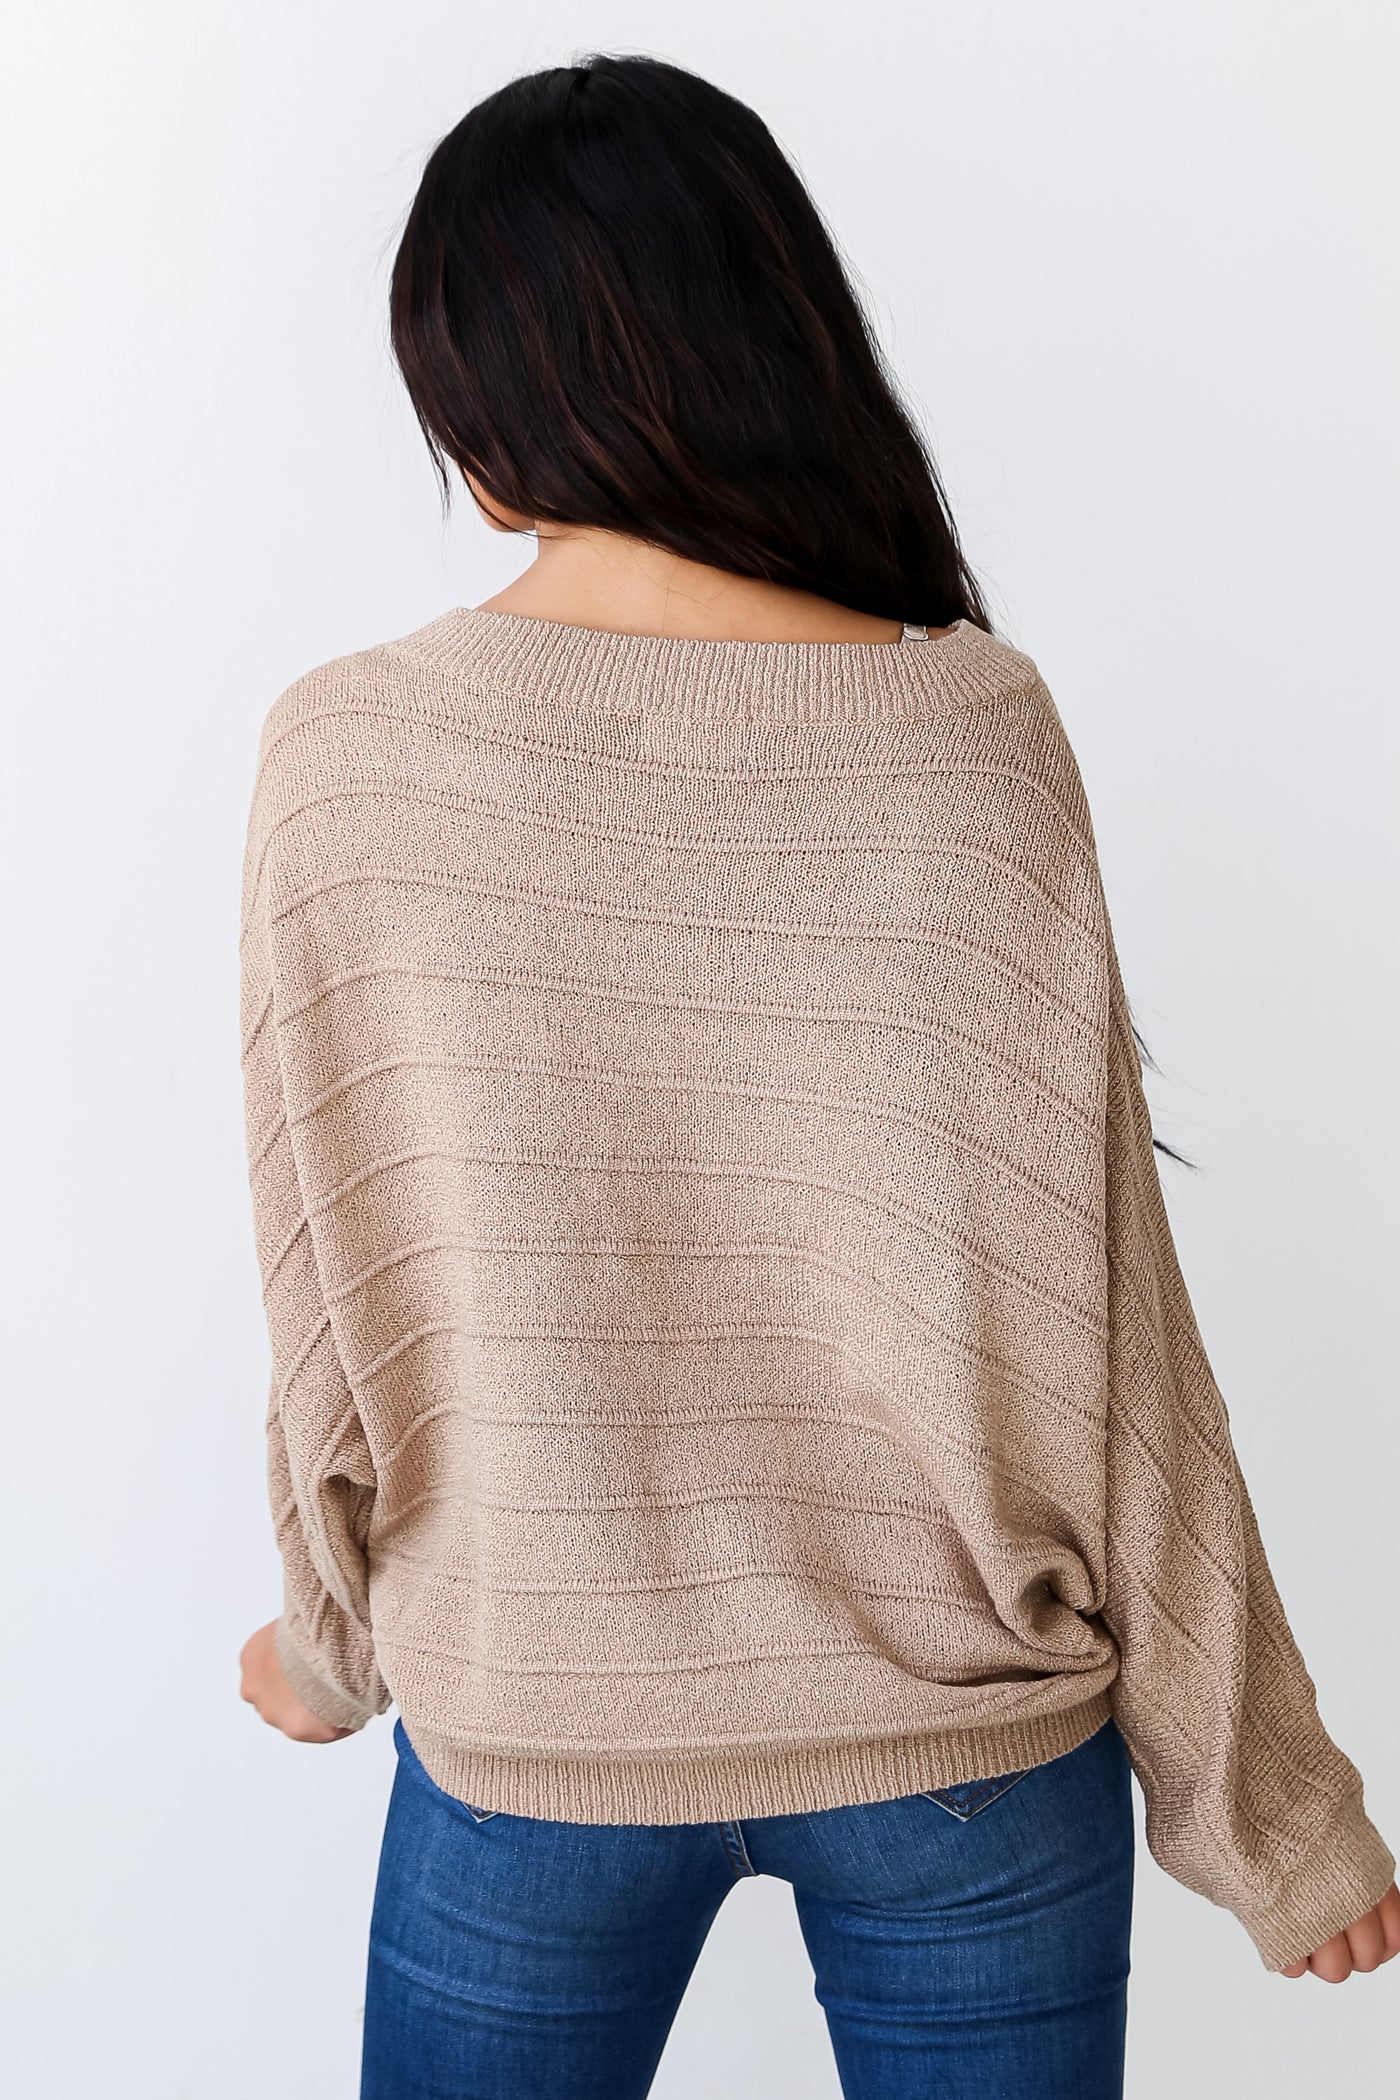 Taupe Lightweight Knit Oversized Sweater back view